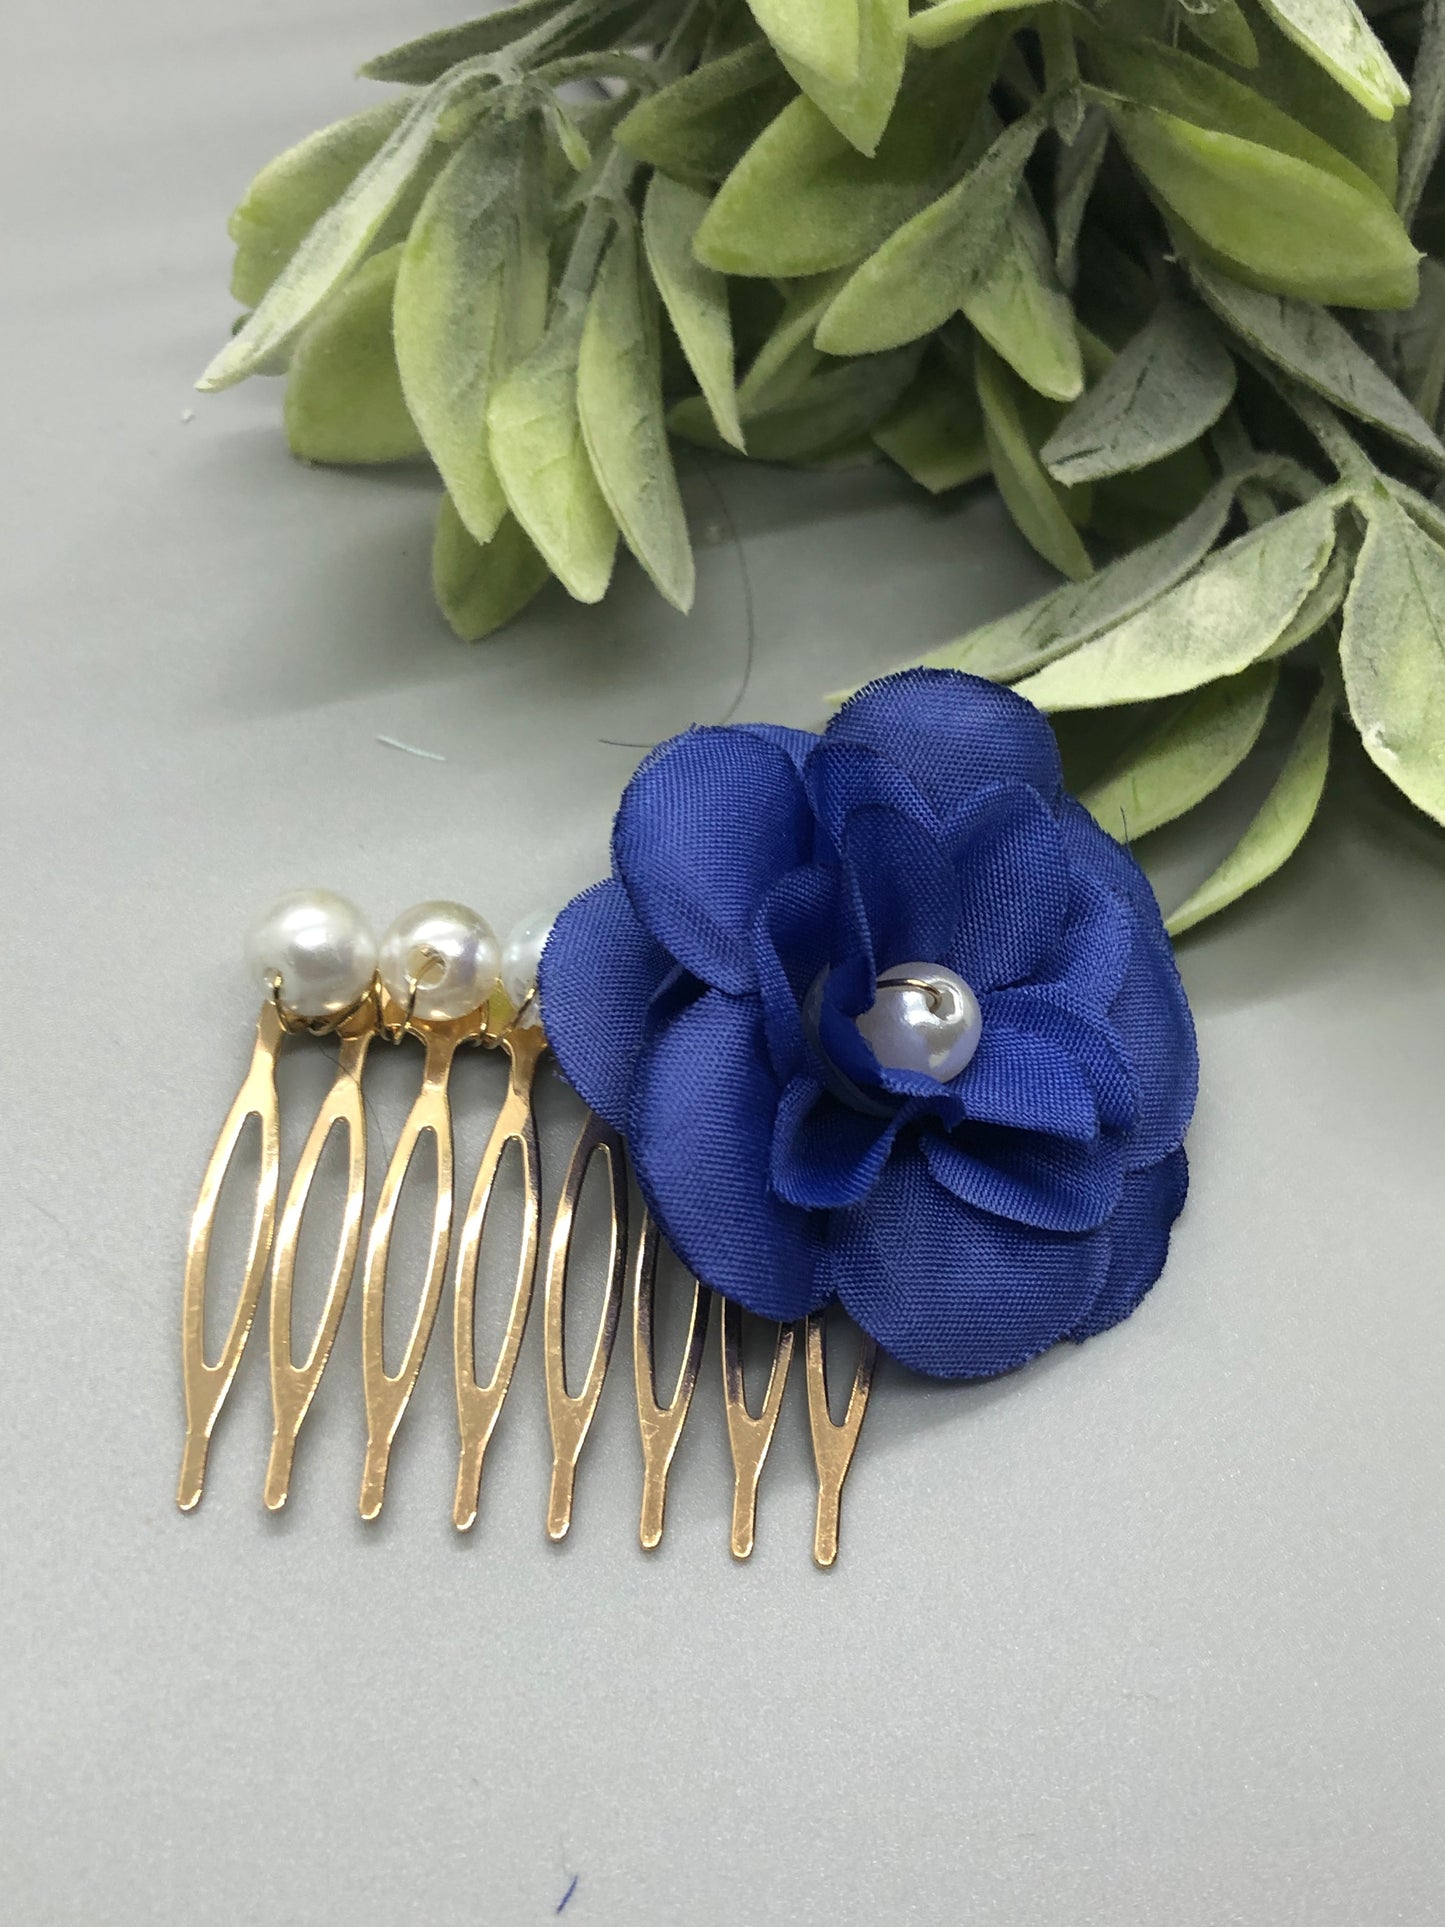 Navy Blue Flower White Beads 2.0' Metal Side Comb Retro Vintage Style 1 pc